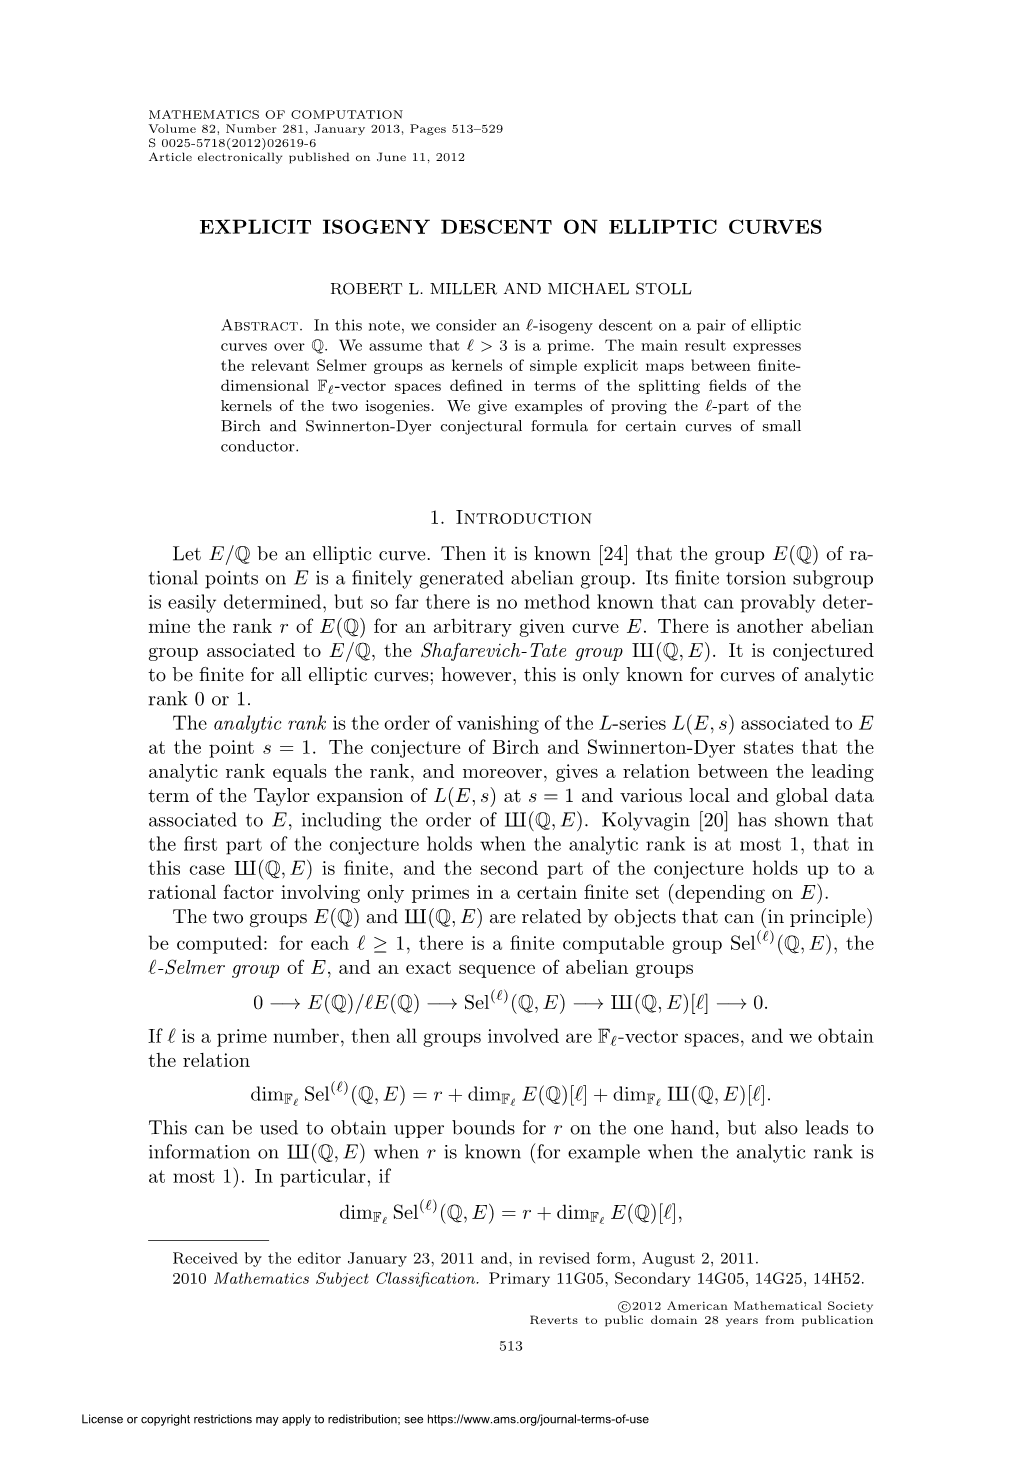 Explicit Isogeny Descent on Elliptic Curves